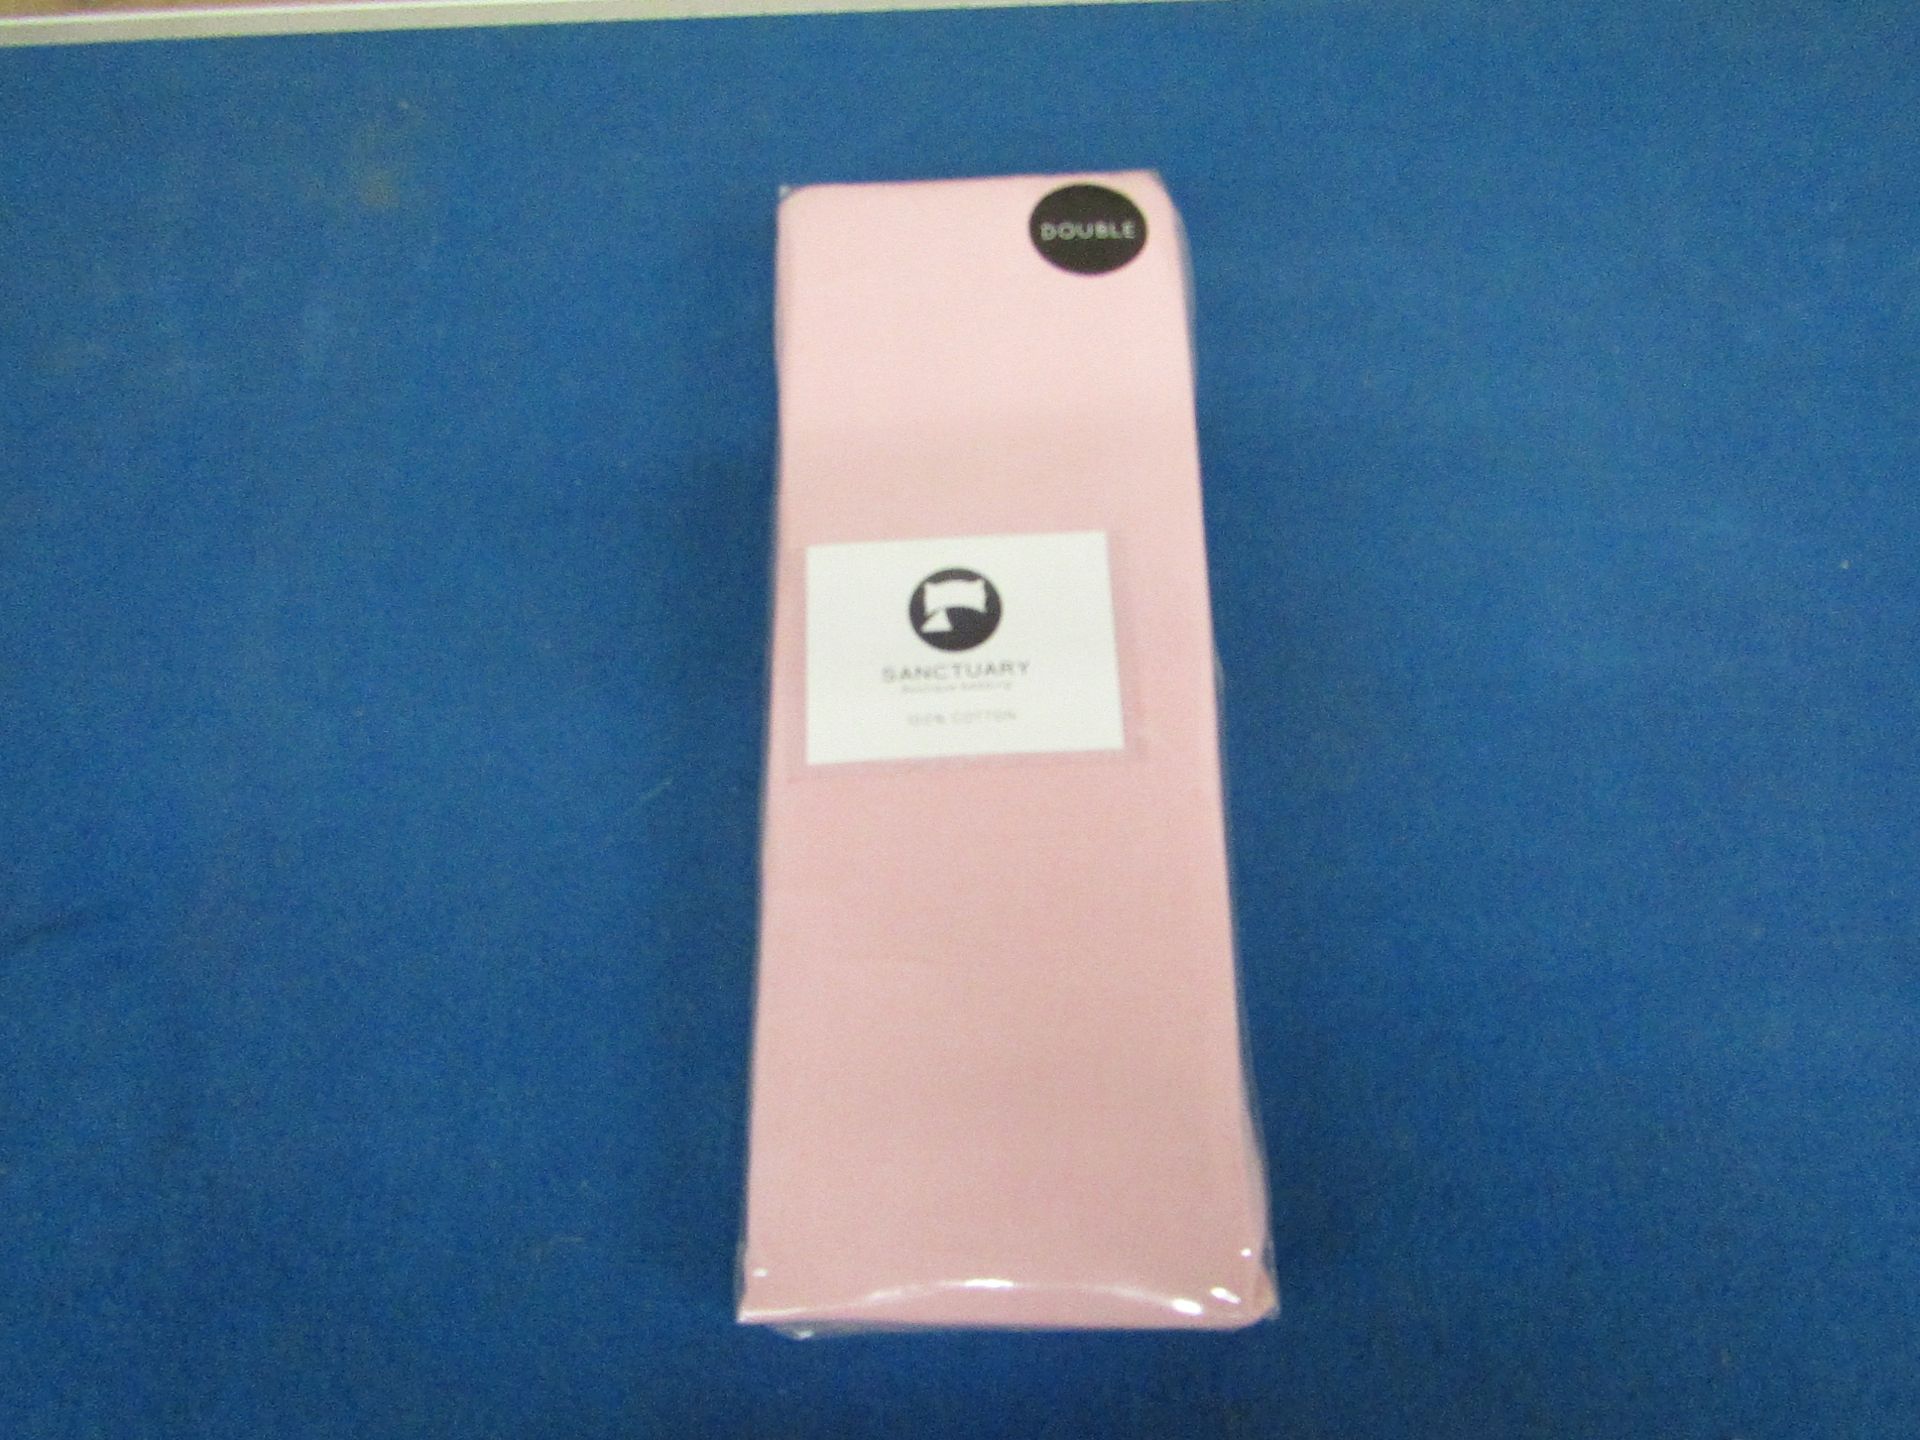 Box of 8x Sanctuary Fitted Sheet With Deep Box Blush Double 100 % Cotton RRP £20 new & Packaged